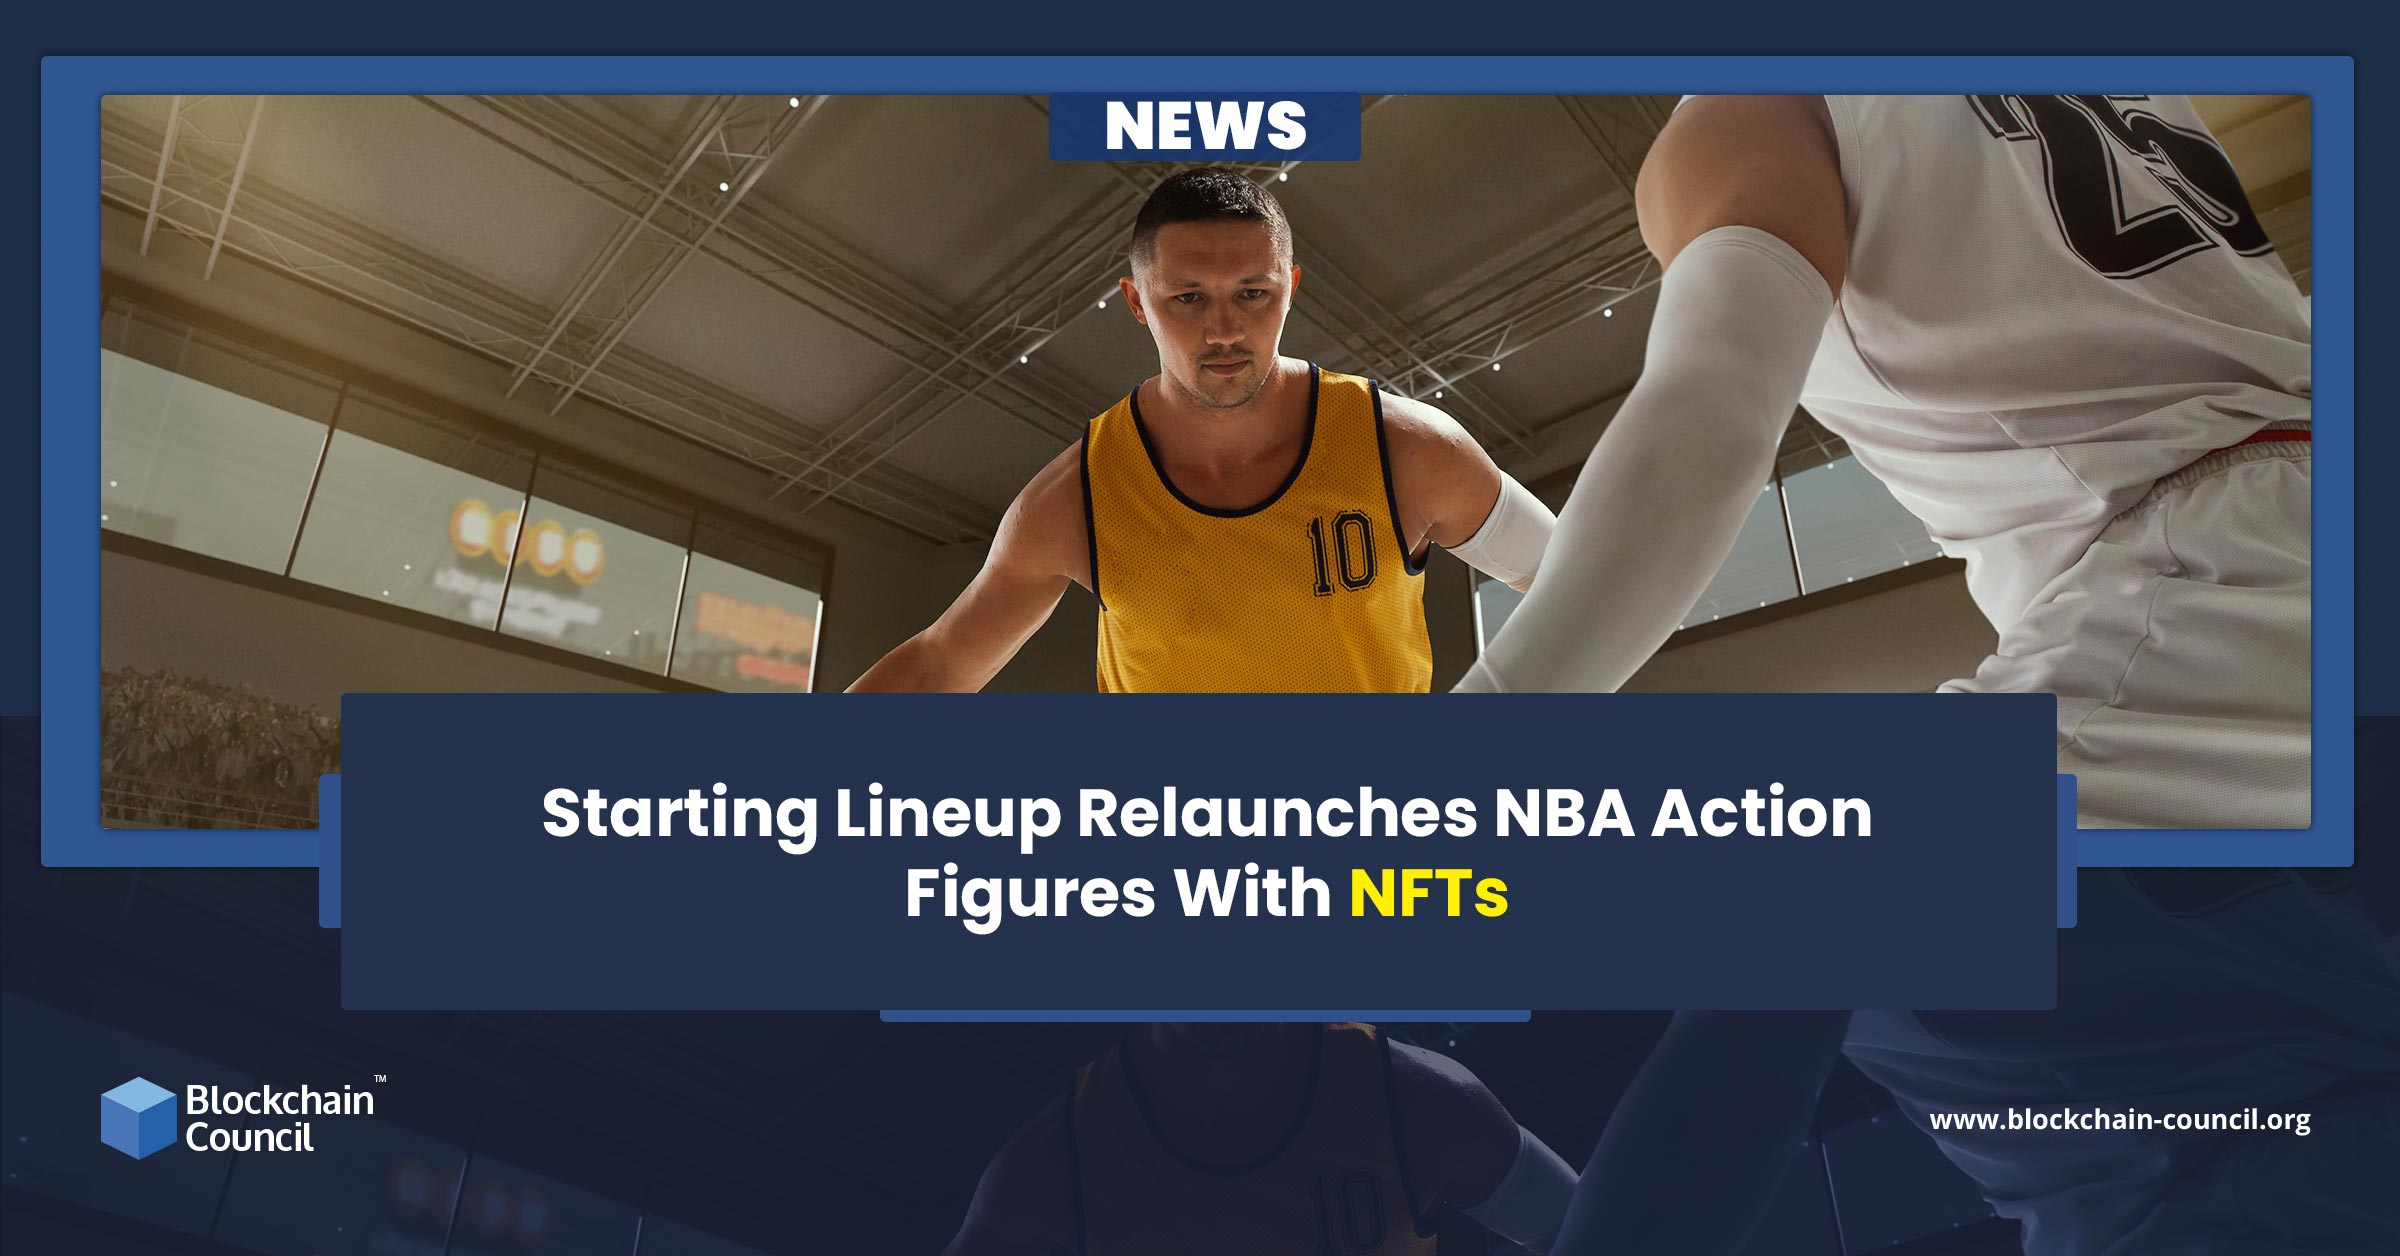 Starting Lineup Relaunches NBA Action Figures With NFTs